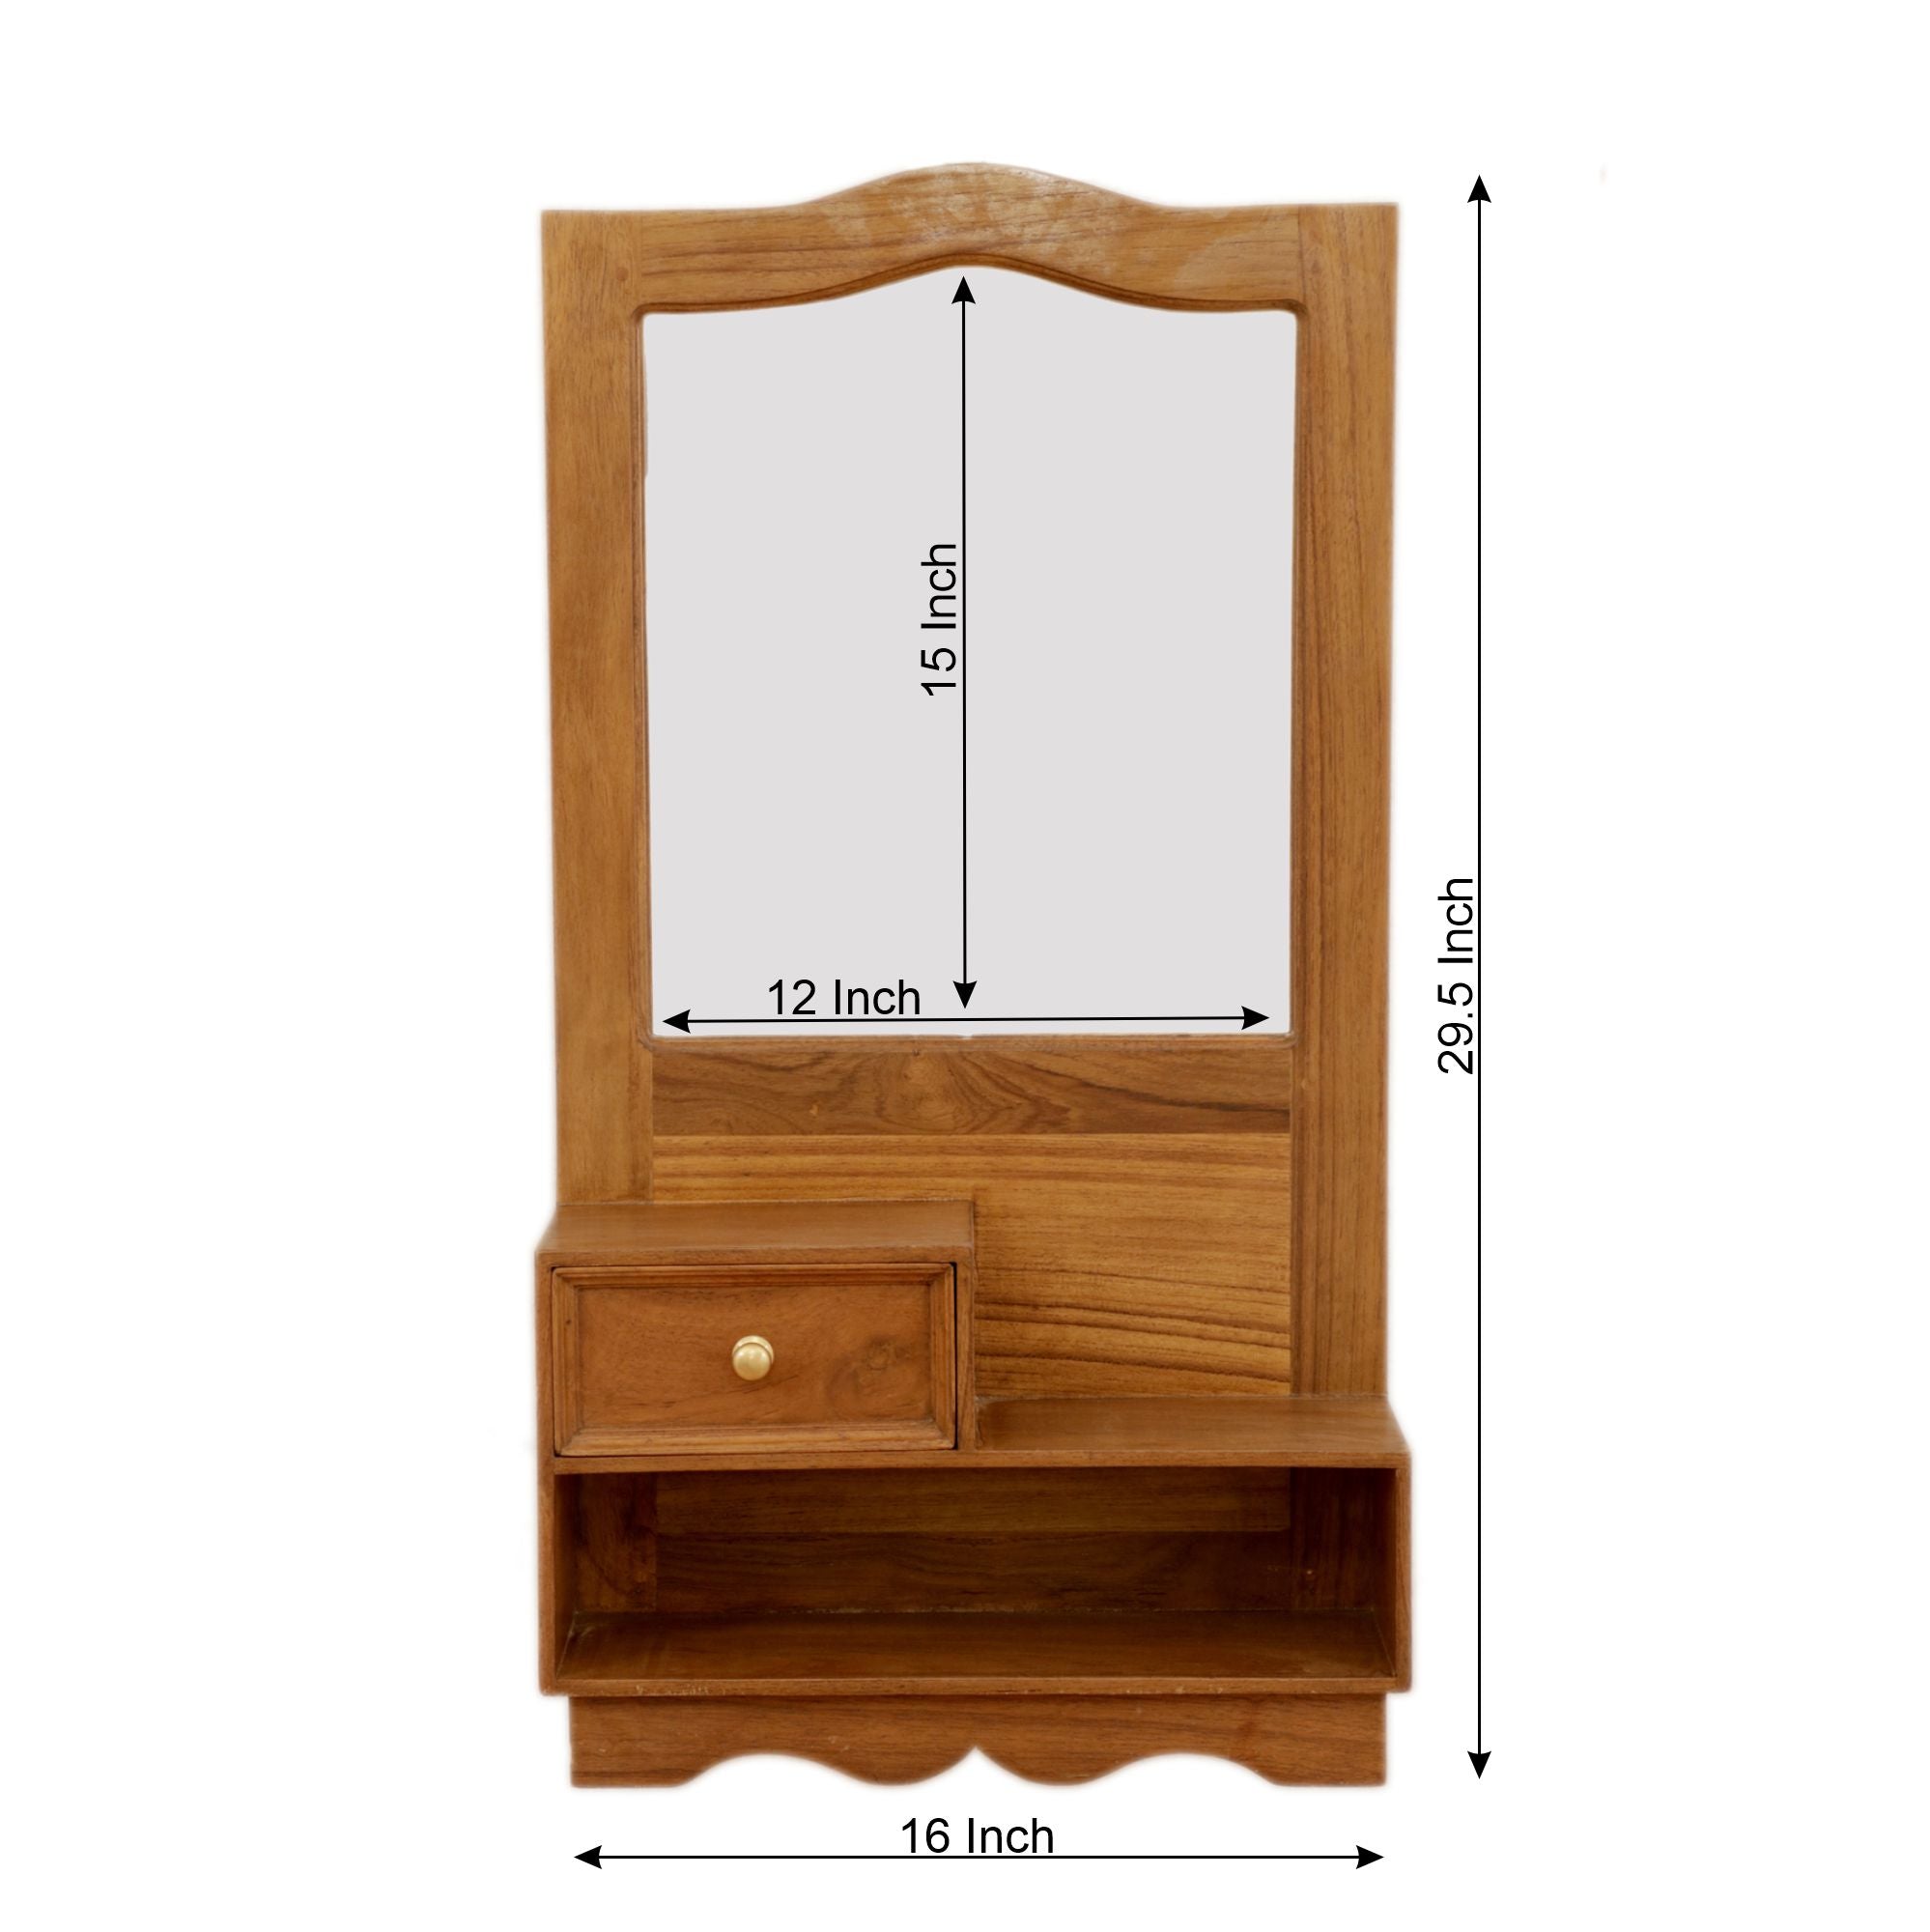 Single Drawer Solid Compact Frame with Mirror Mirror